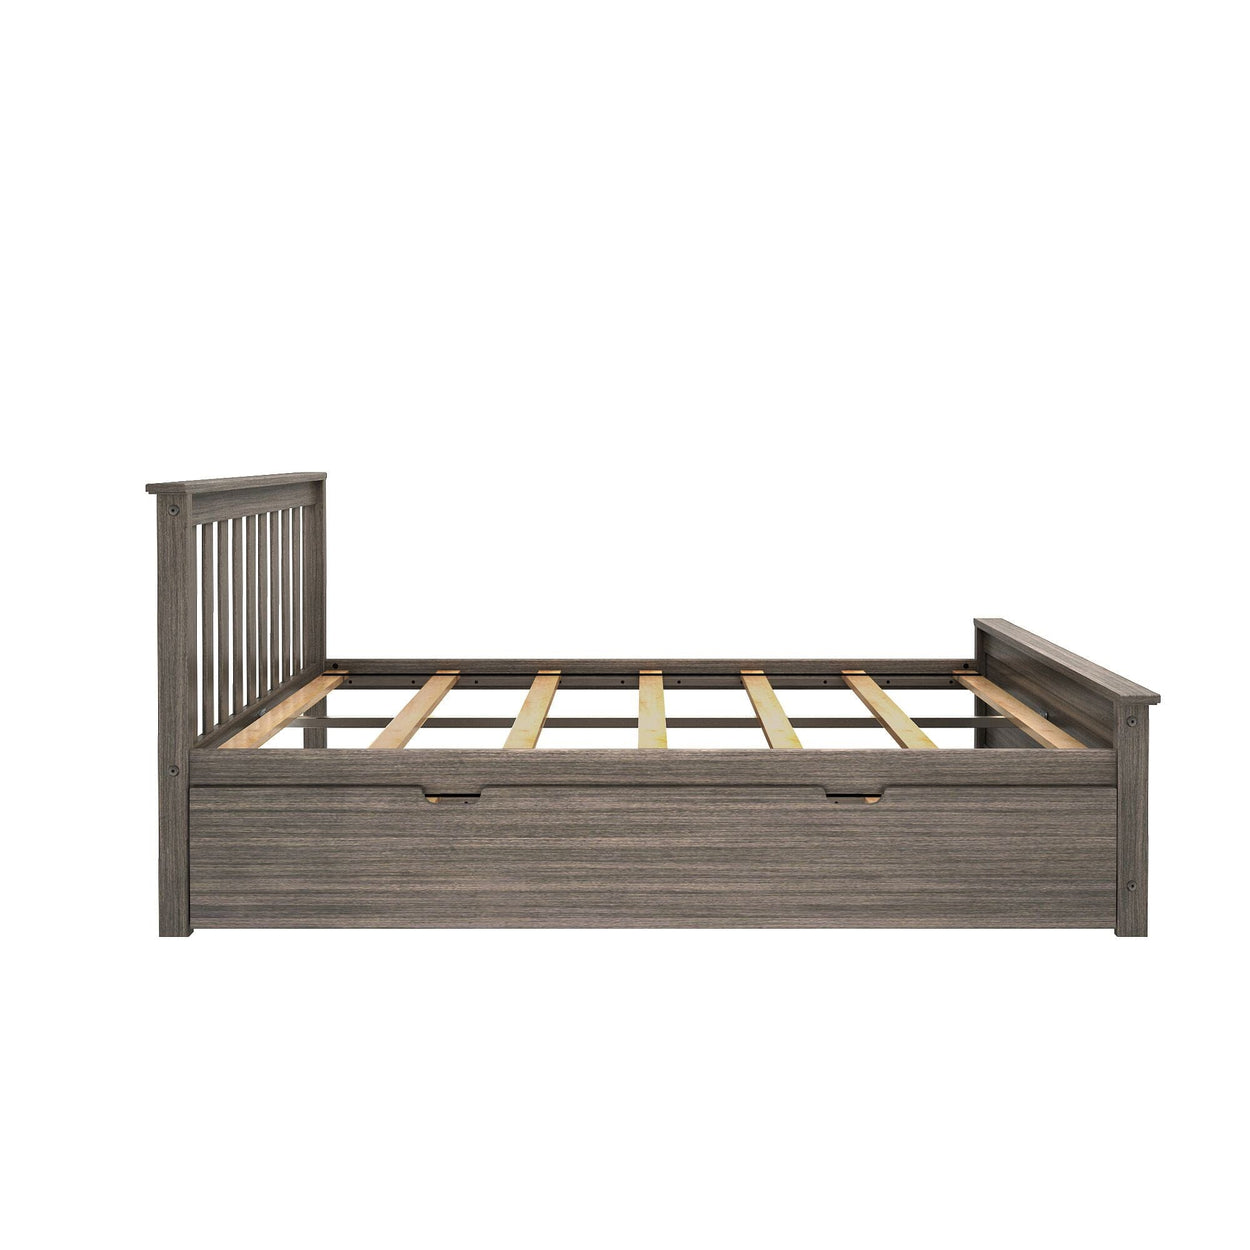 186211-151 : Kids Beds Classic Full-Size Bed with Trundle, Clay